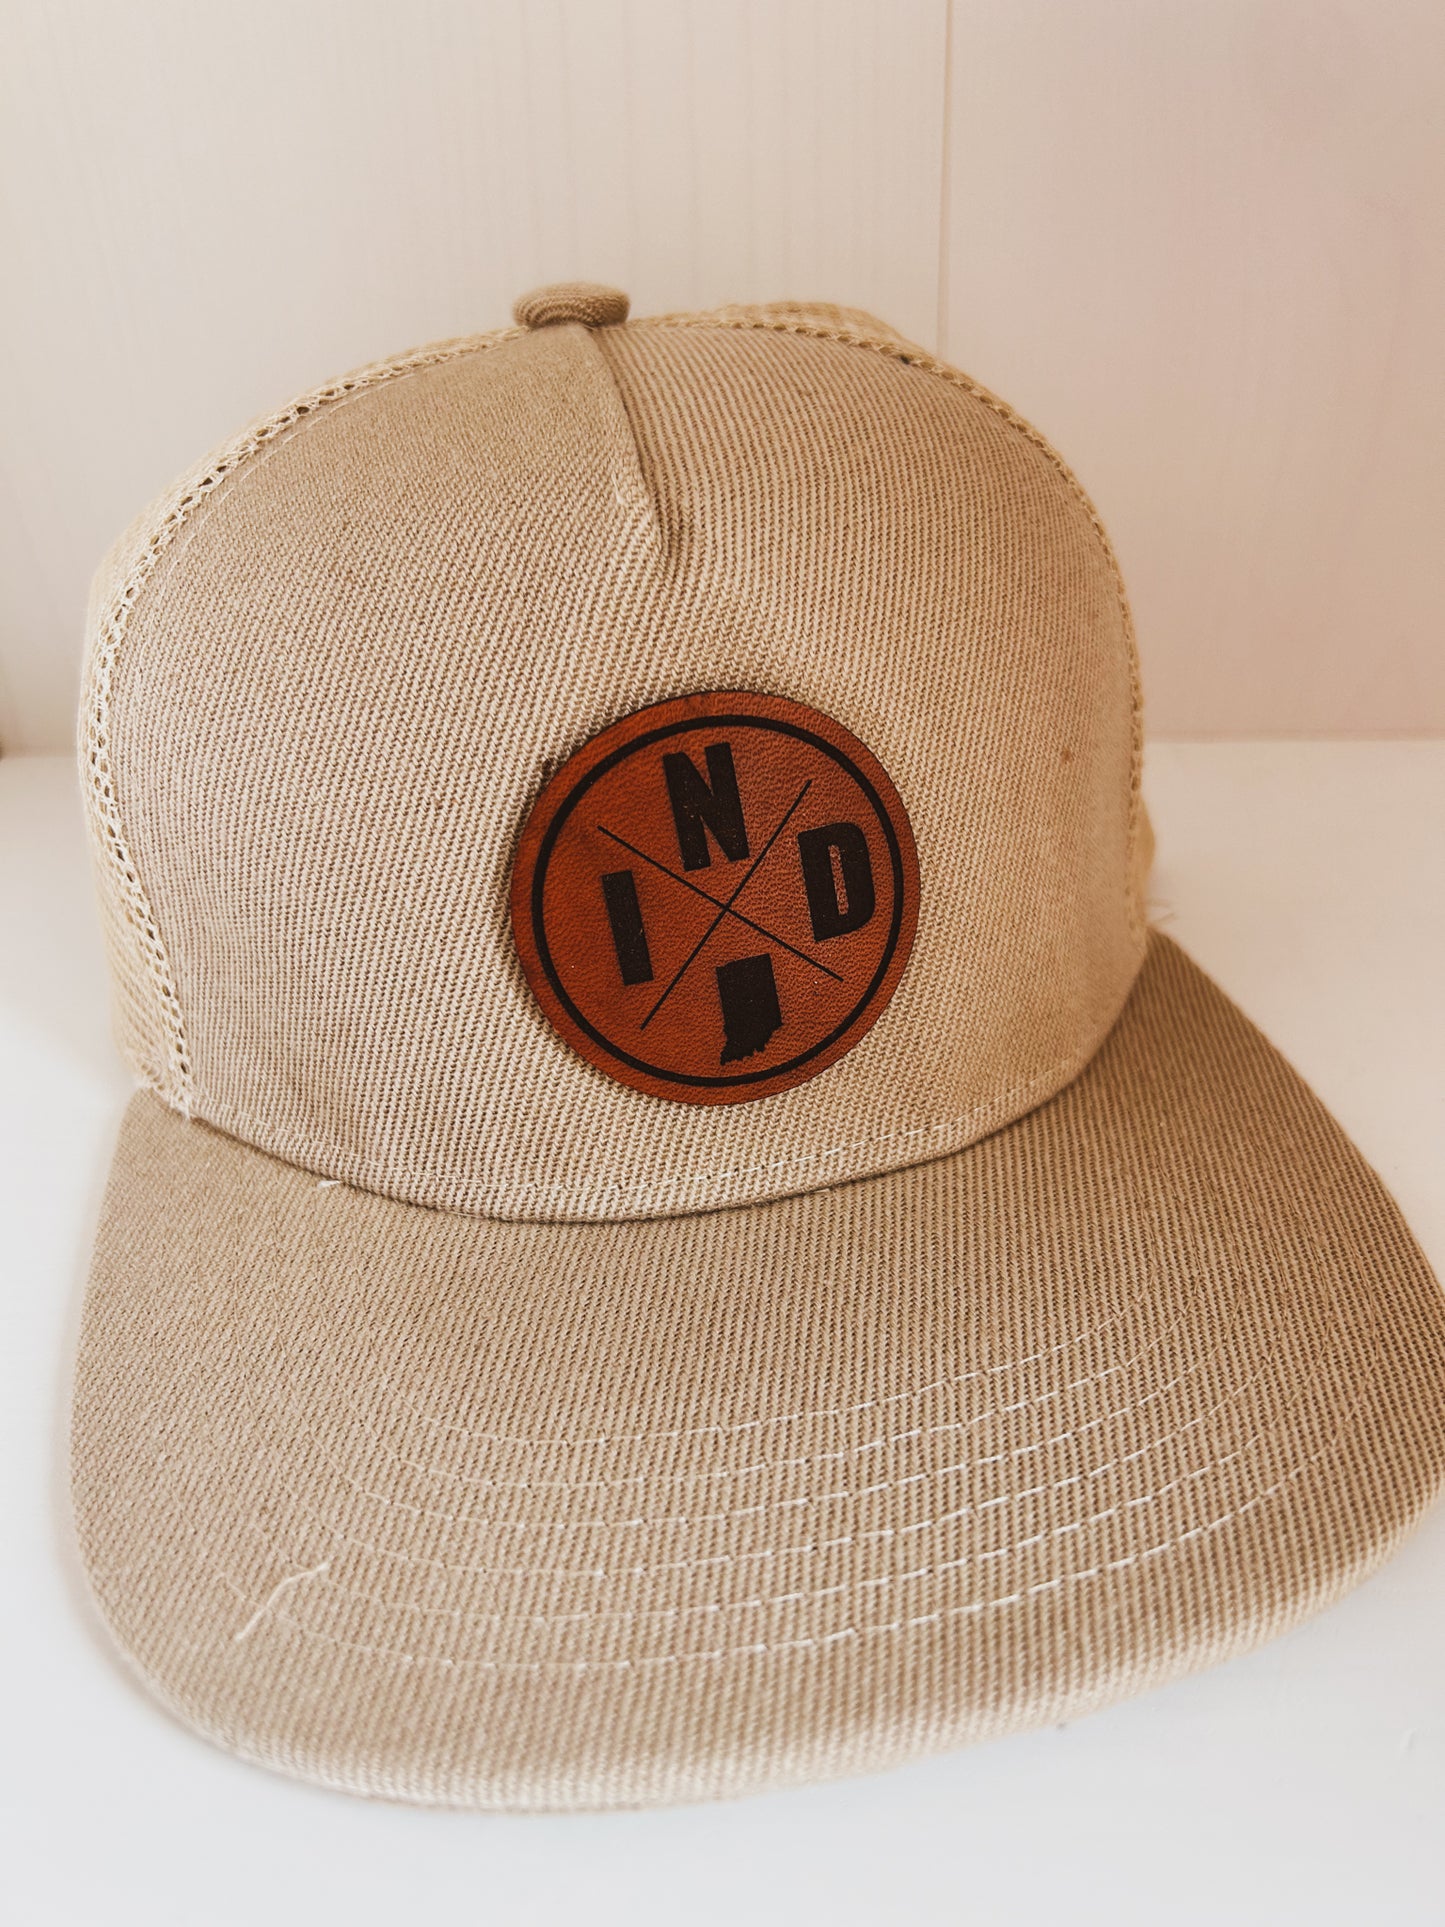 Circle IND Leather Patch on Khaki Trucker Hat - Kids